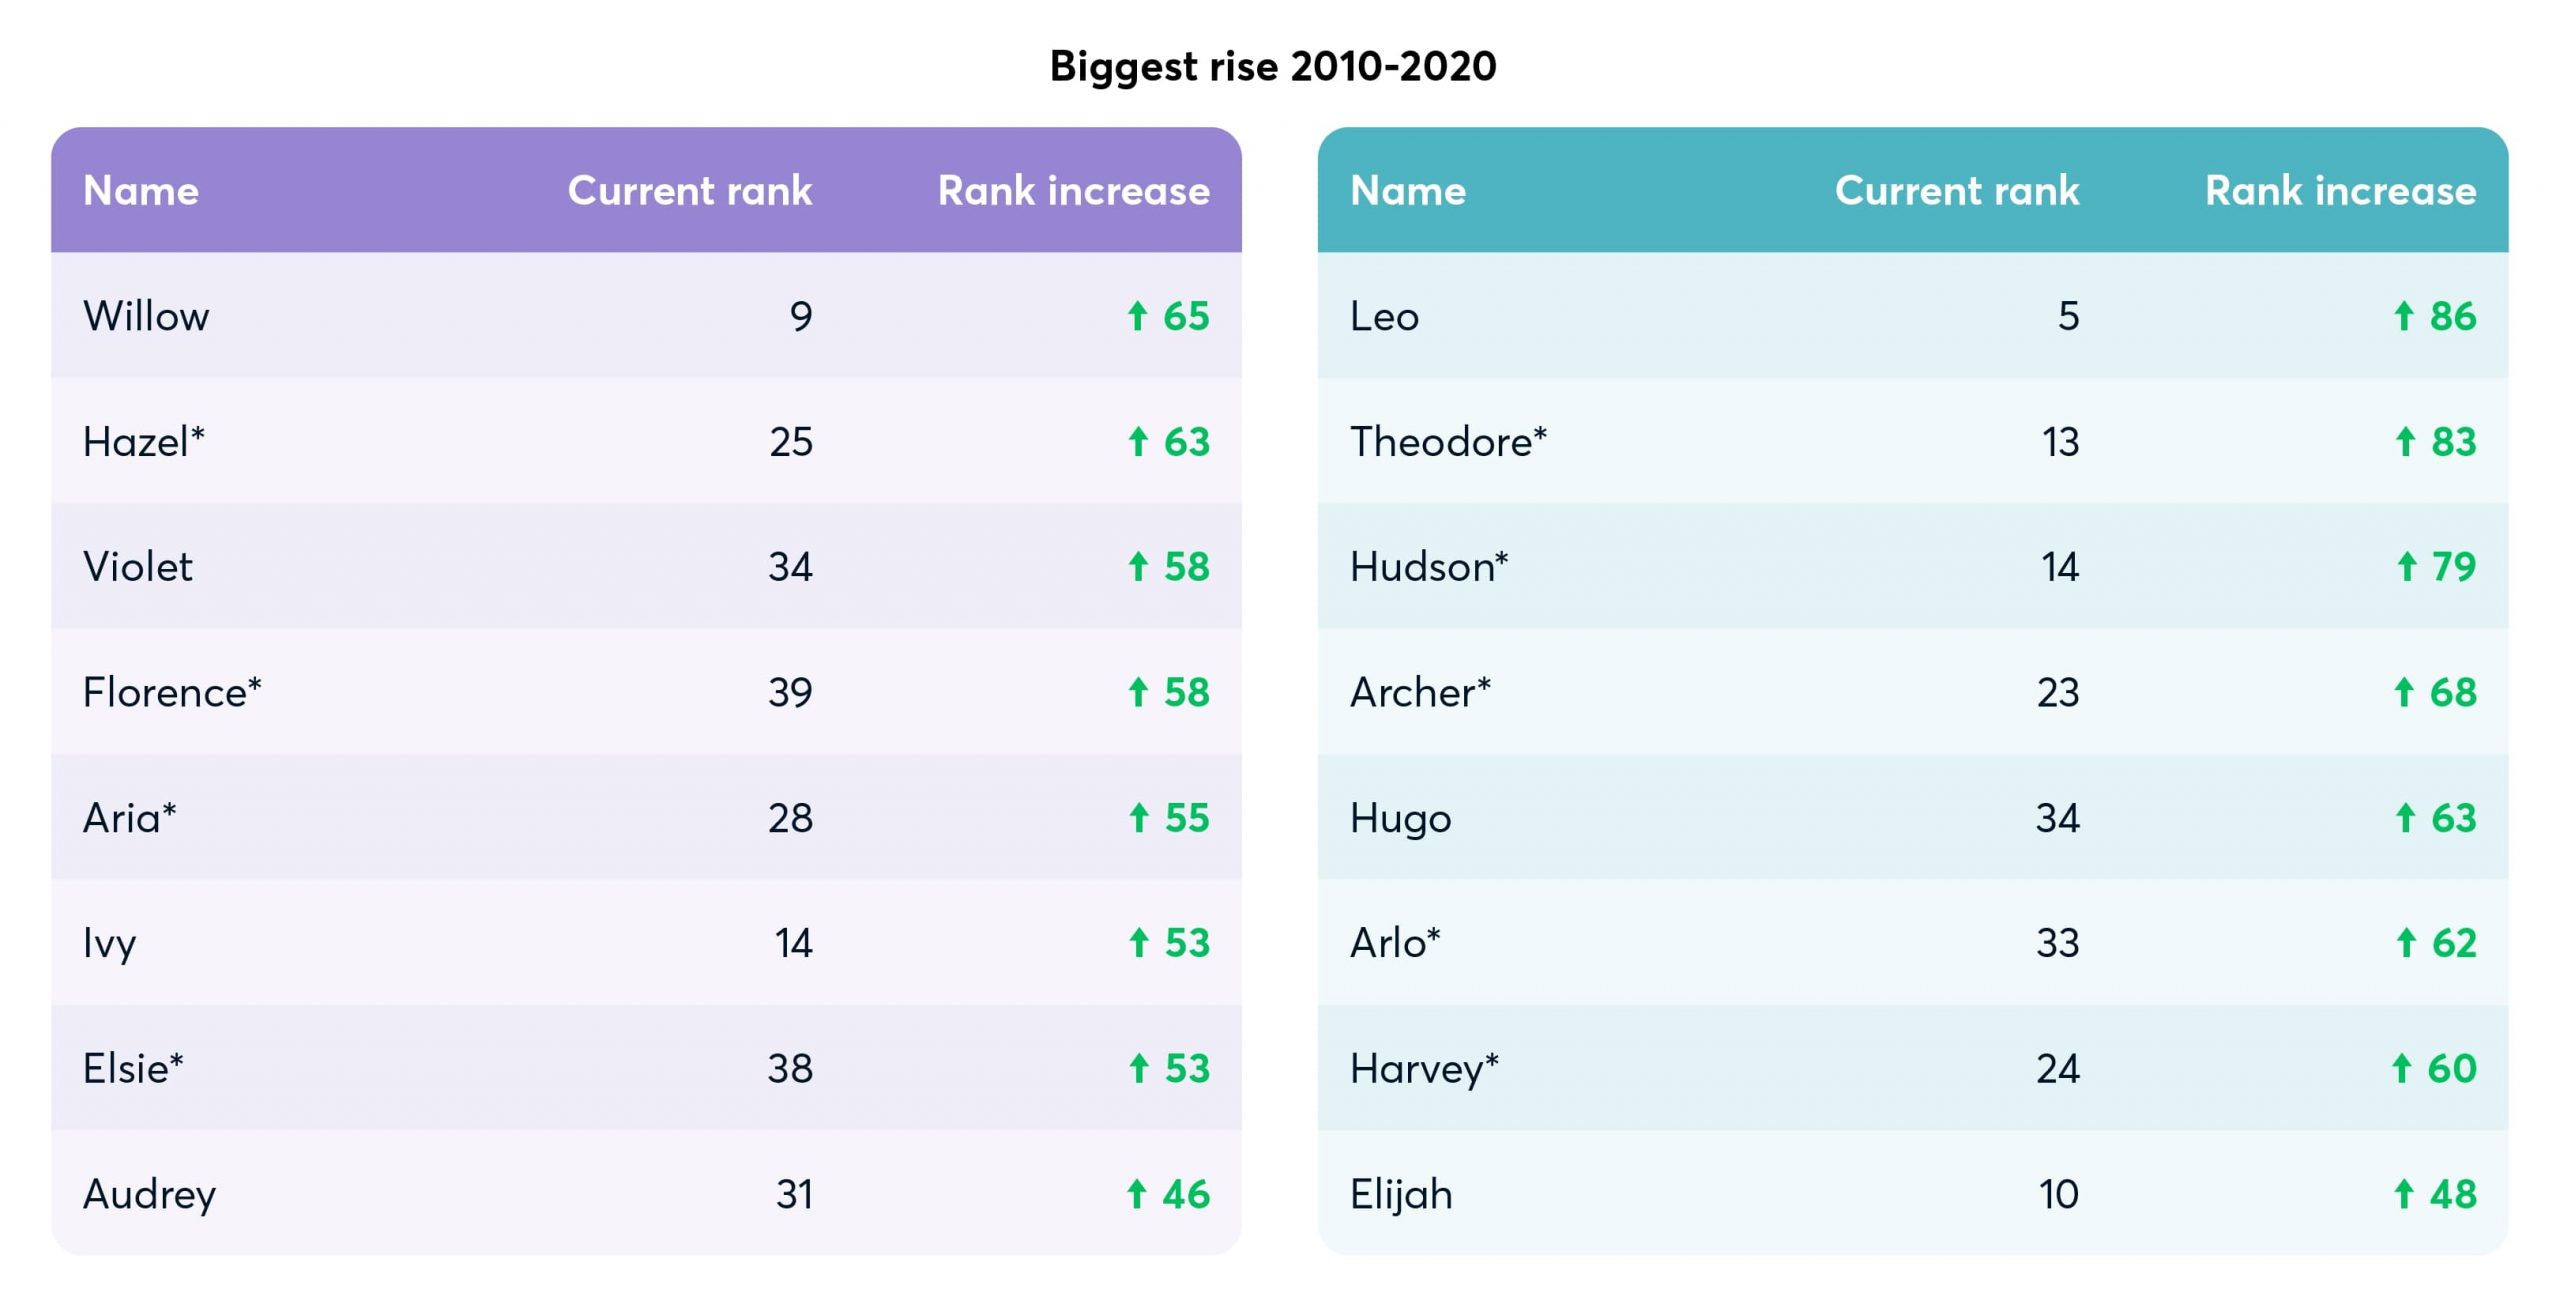 names with the biggest rise between 2010-2020